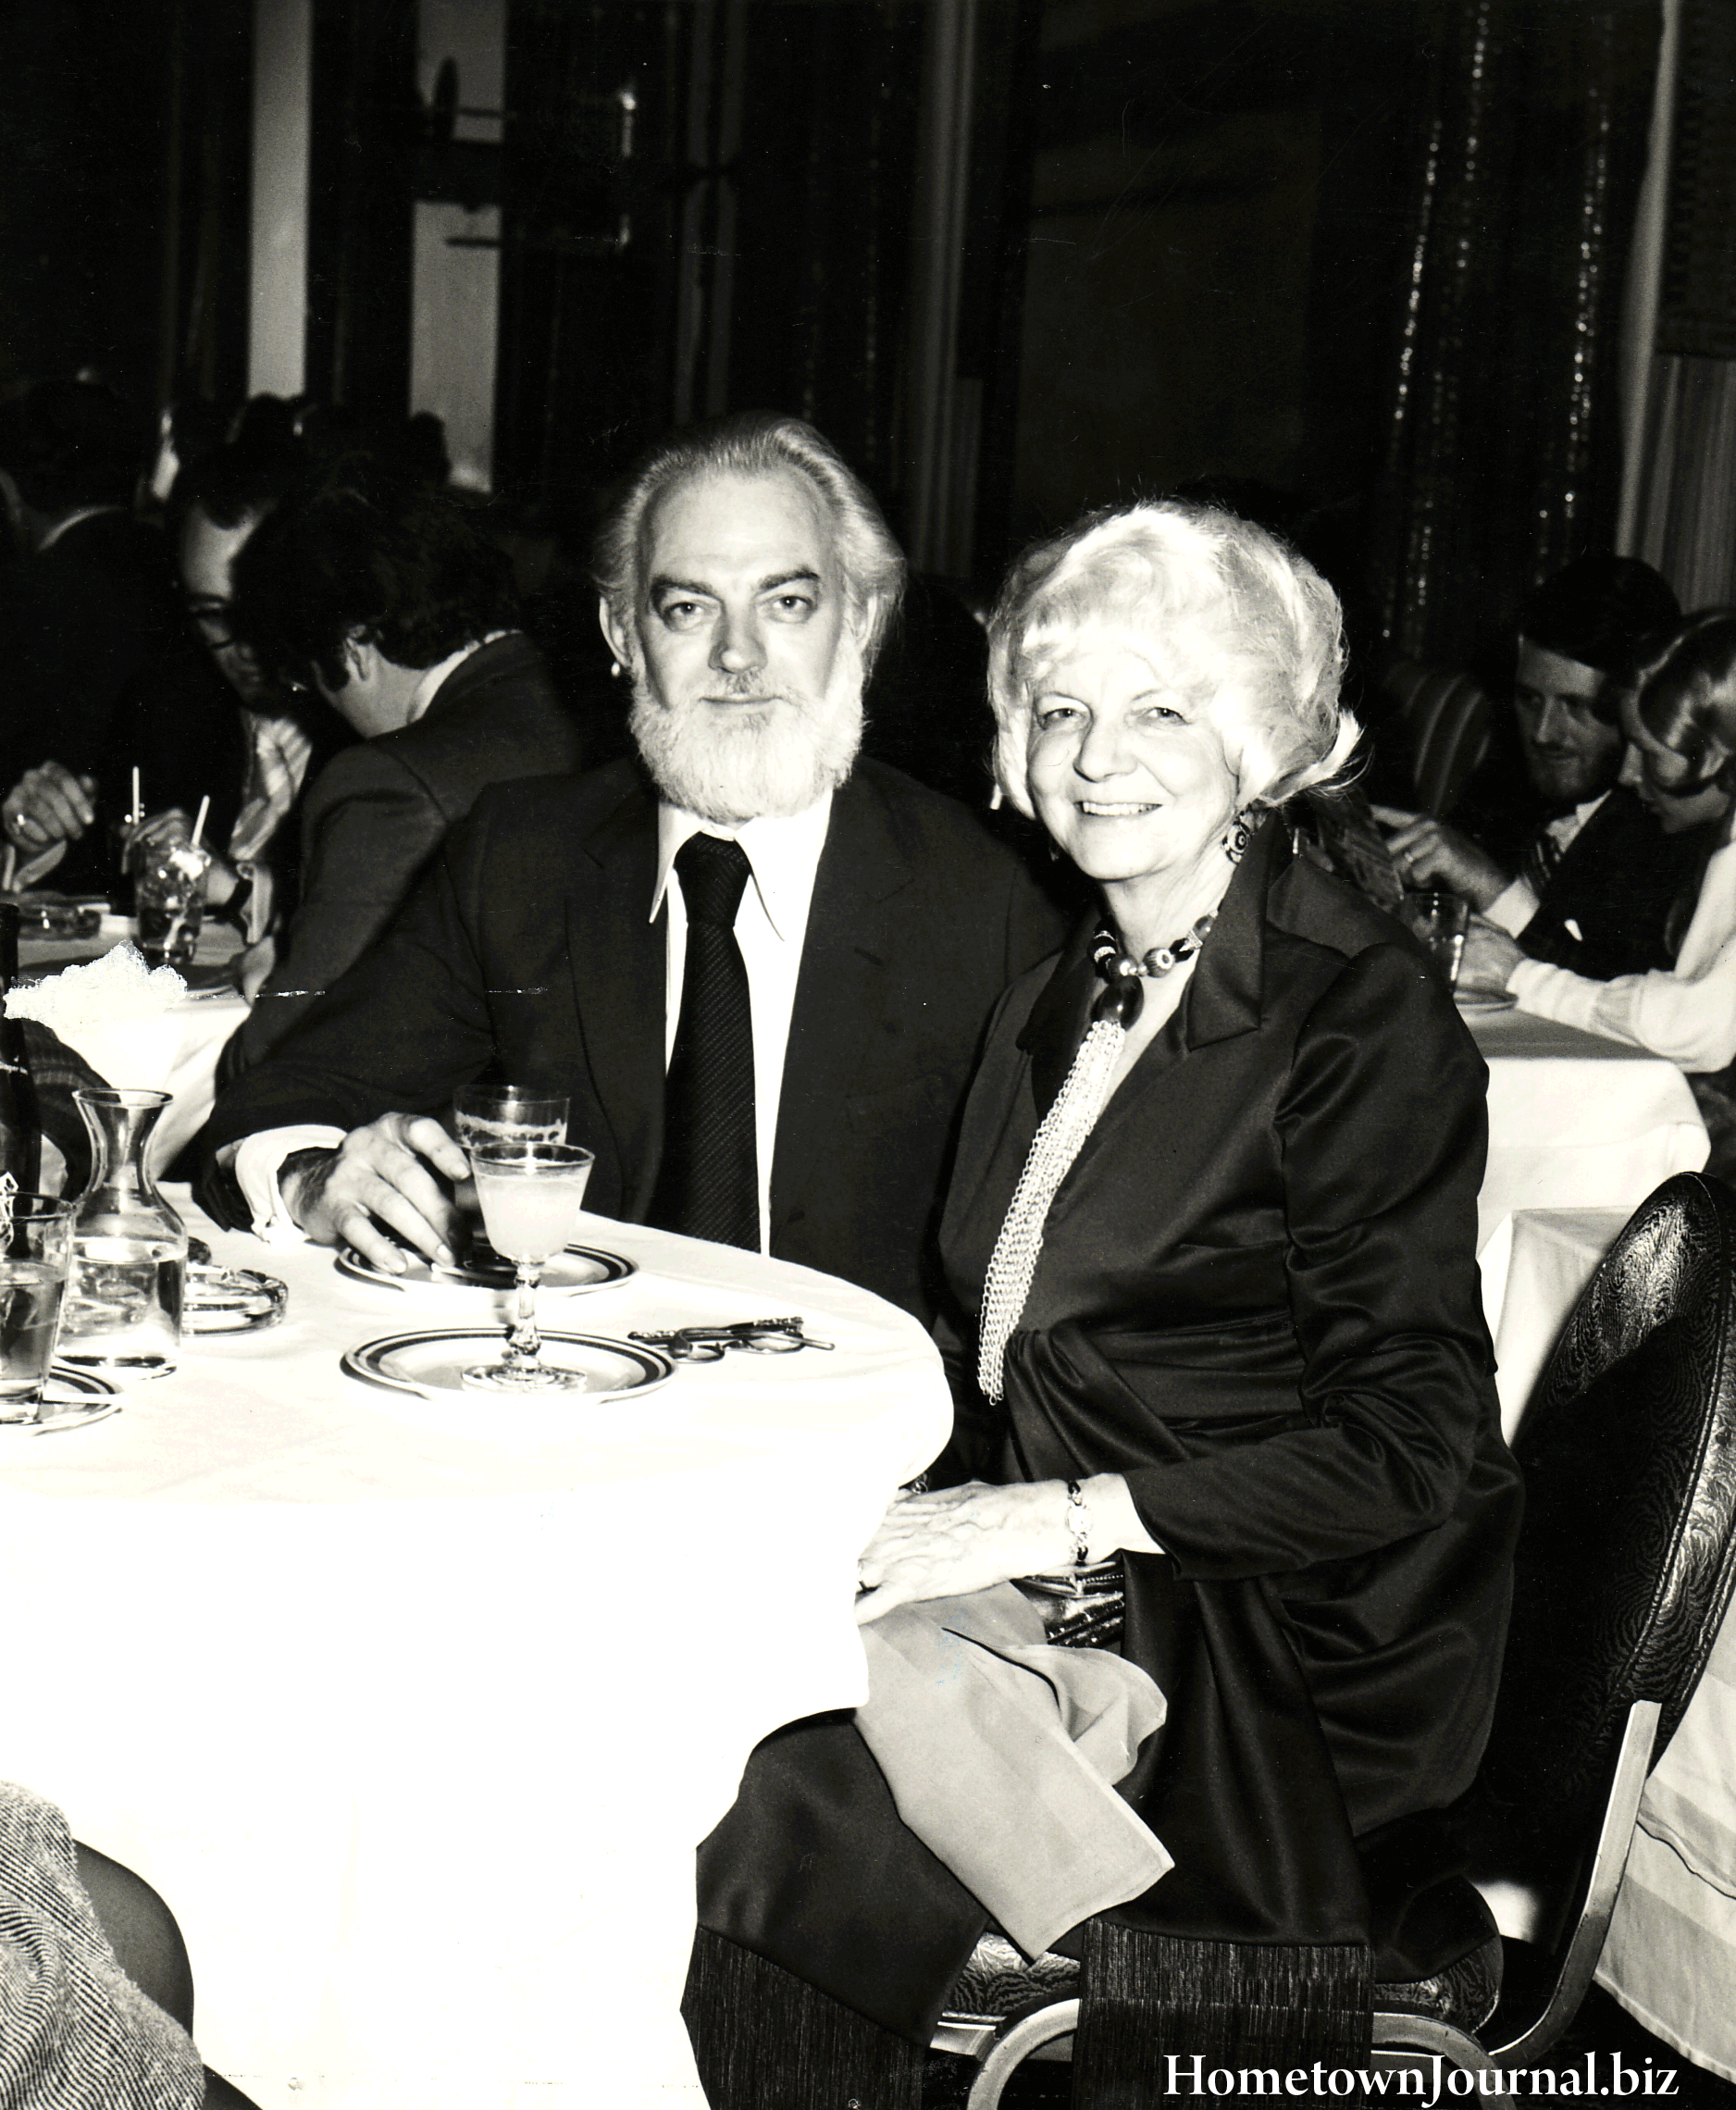 Paul Jenkins and his mother, Nadyne Herrick, enjoy a dinner together in this undated photo.